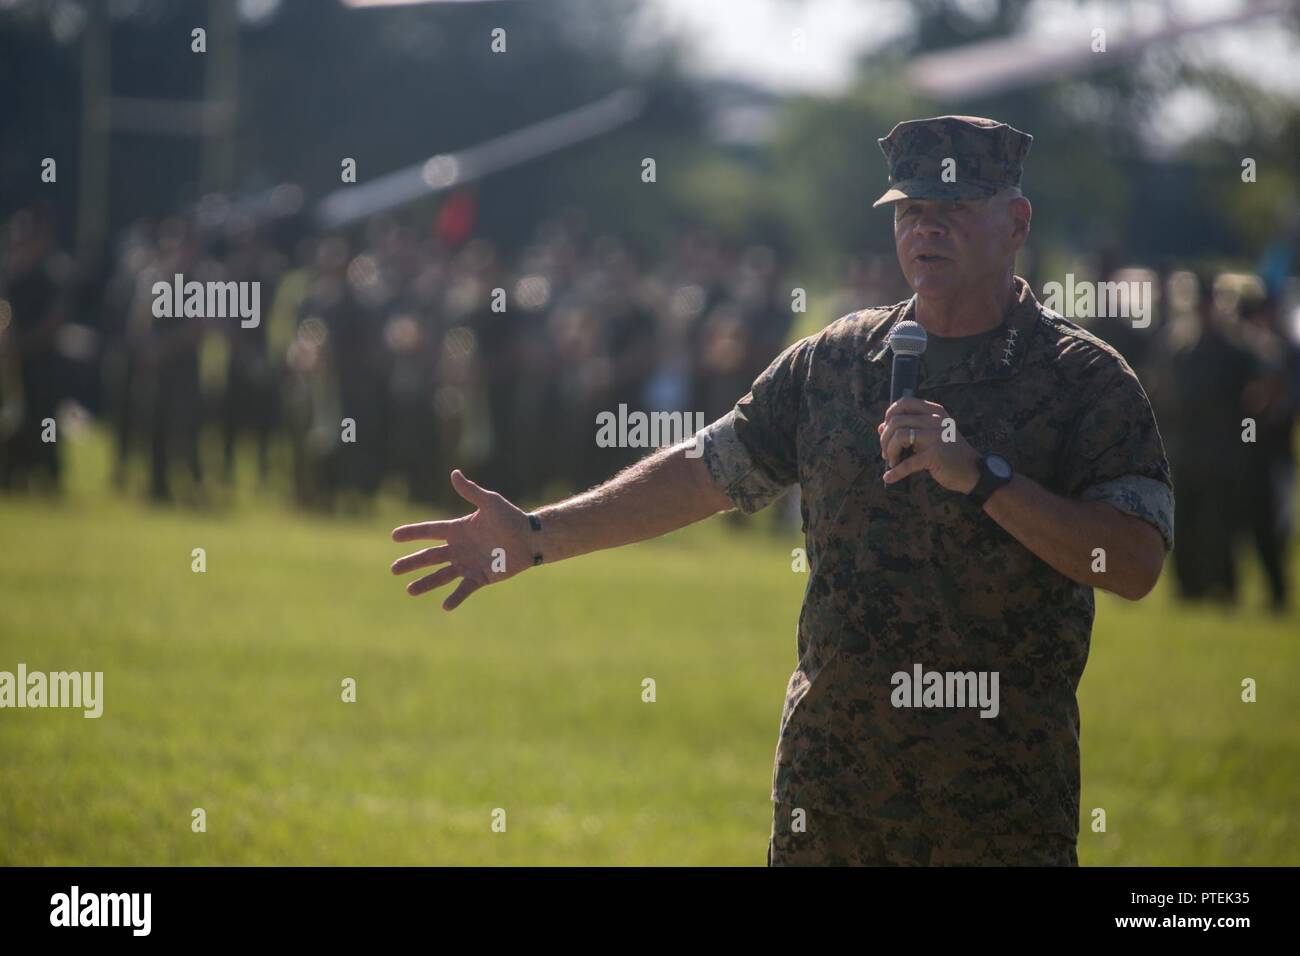 U.S. Marine Corps Gen. Robert B. Neller, Commandant of the Marine Corps, speaks during the II Marine Expeditionary Force (II MEF) change of command ceremony on Camp Lejeune, N.C., July 14, 2017. During the ceremony, Maj Gen. Walter L. Miller, Jr. relinquished his post as commanding general of II MEF to Lt. Gen. Robert F. Hedelund. Stock Photo